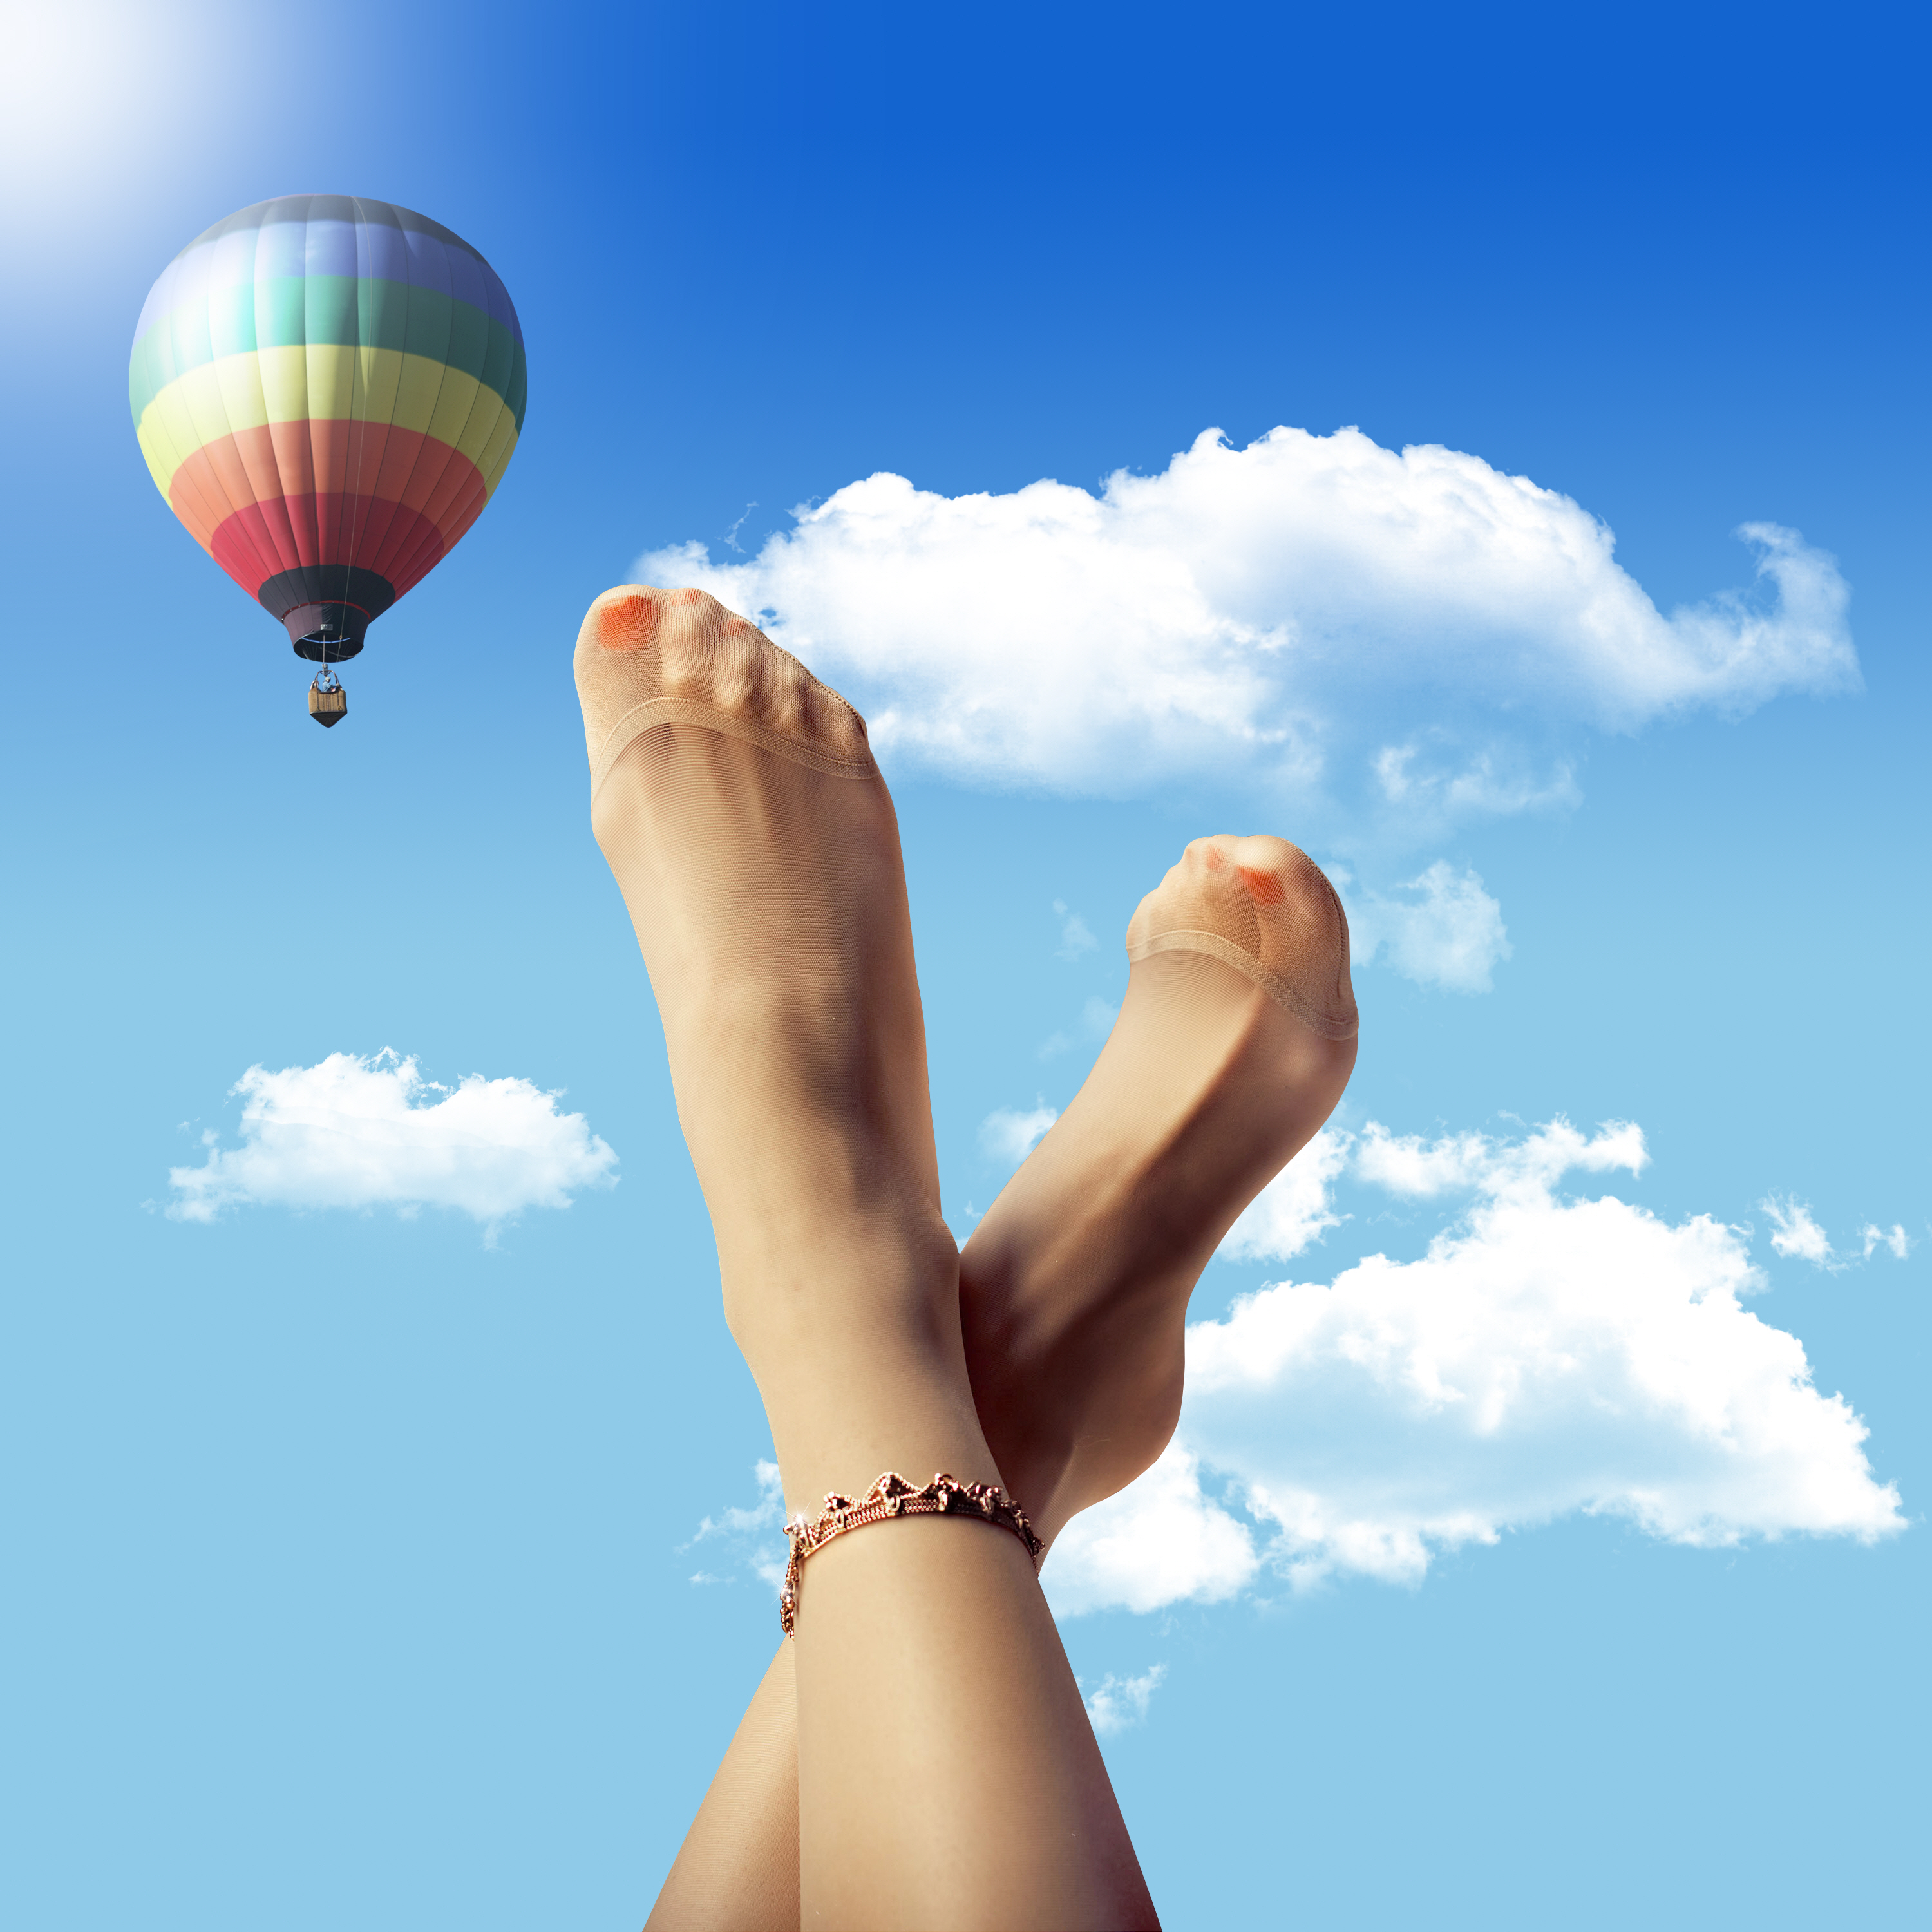 People 3000x3000 sky hot air balloons clouds anklet painted toenails pantyhose POV women